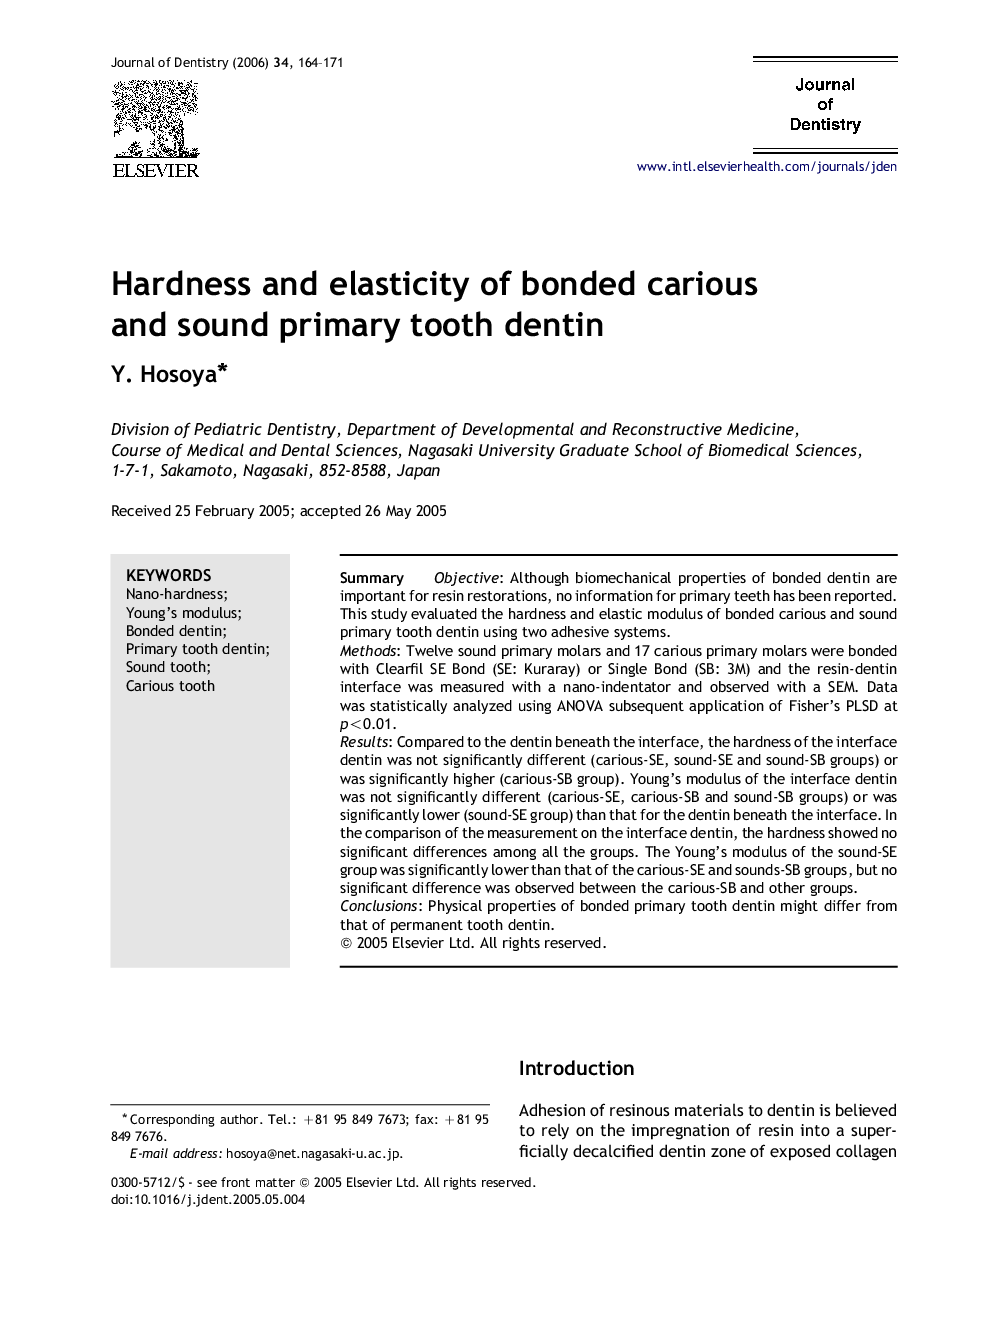 Hardness and elasticity of bonded carious and sound primary tooth dentin